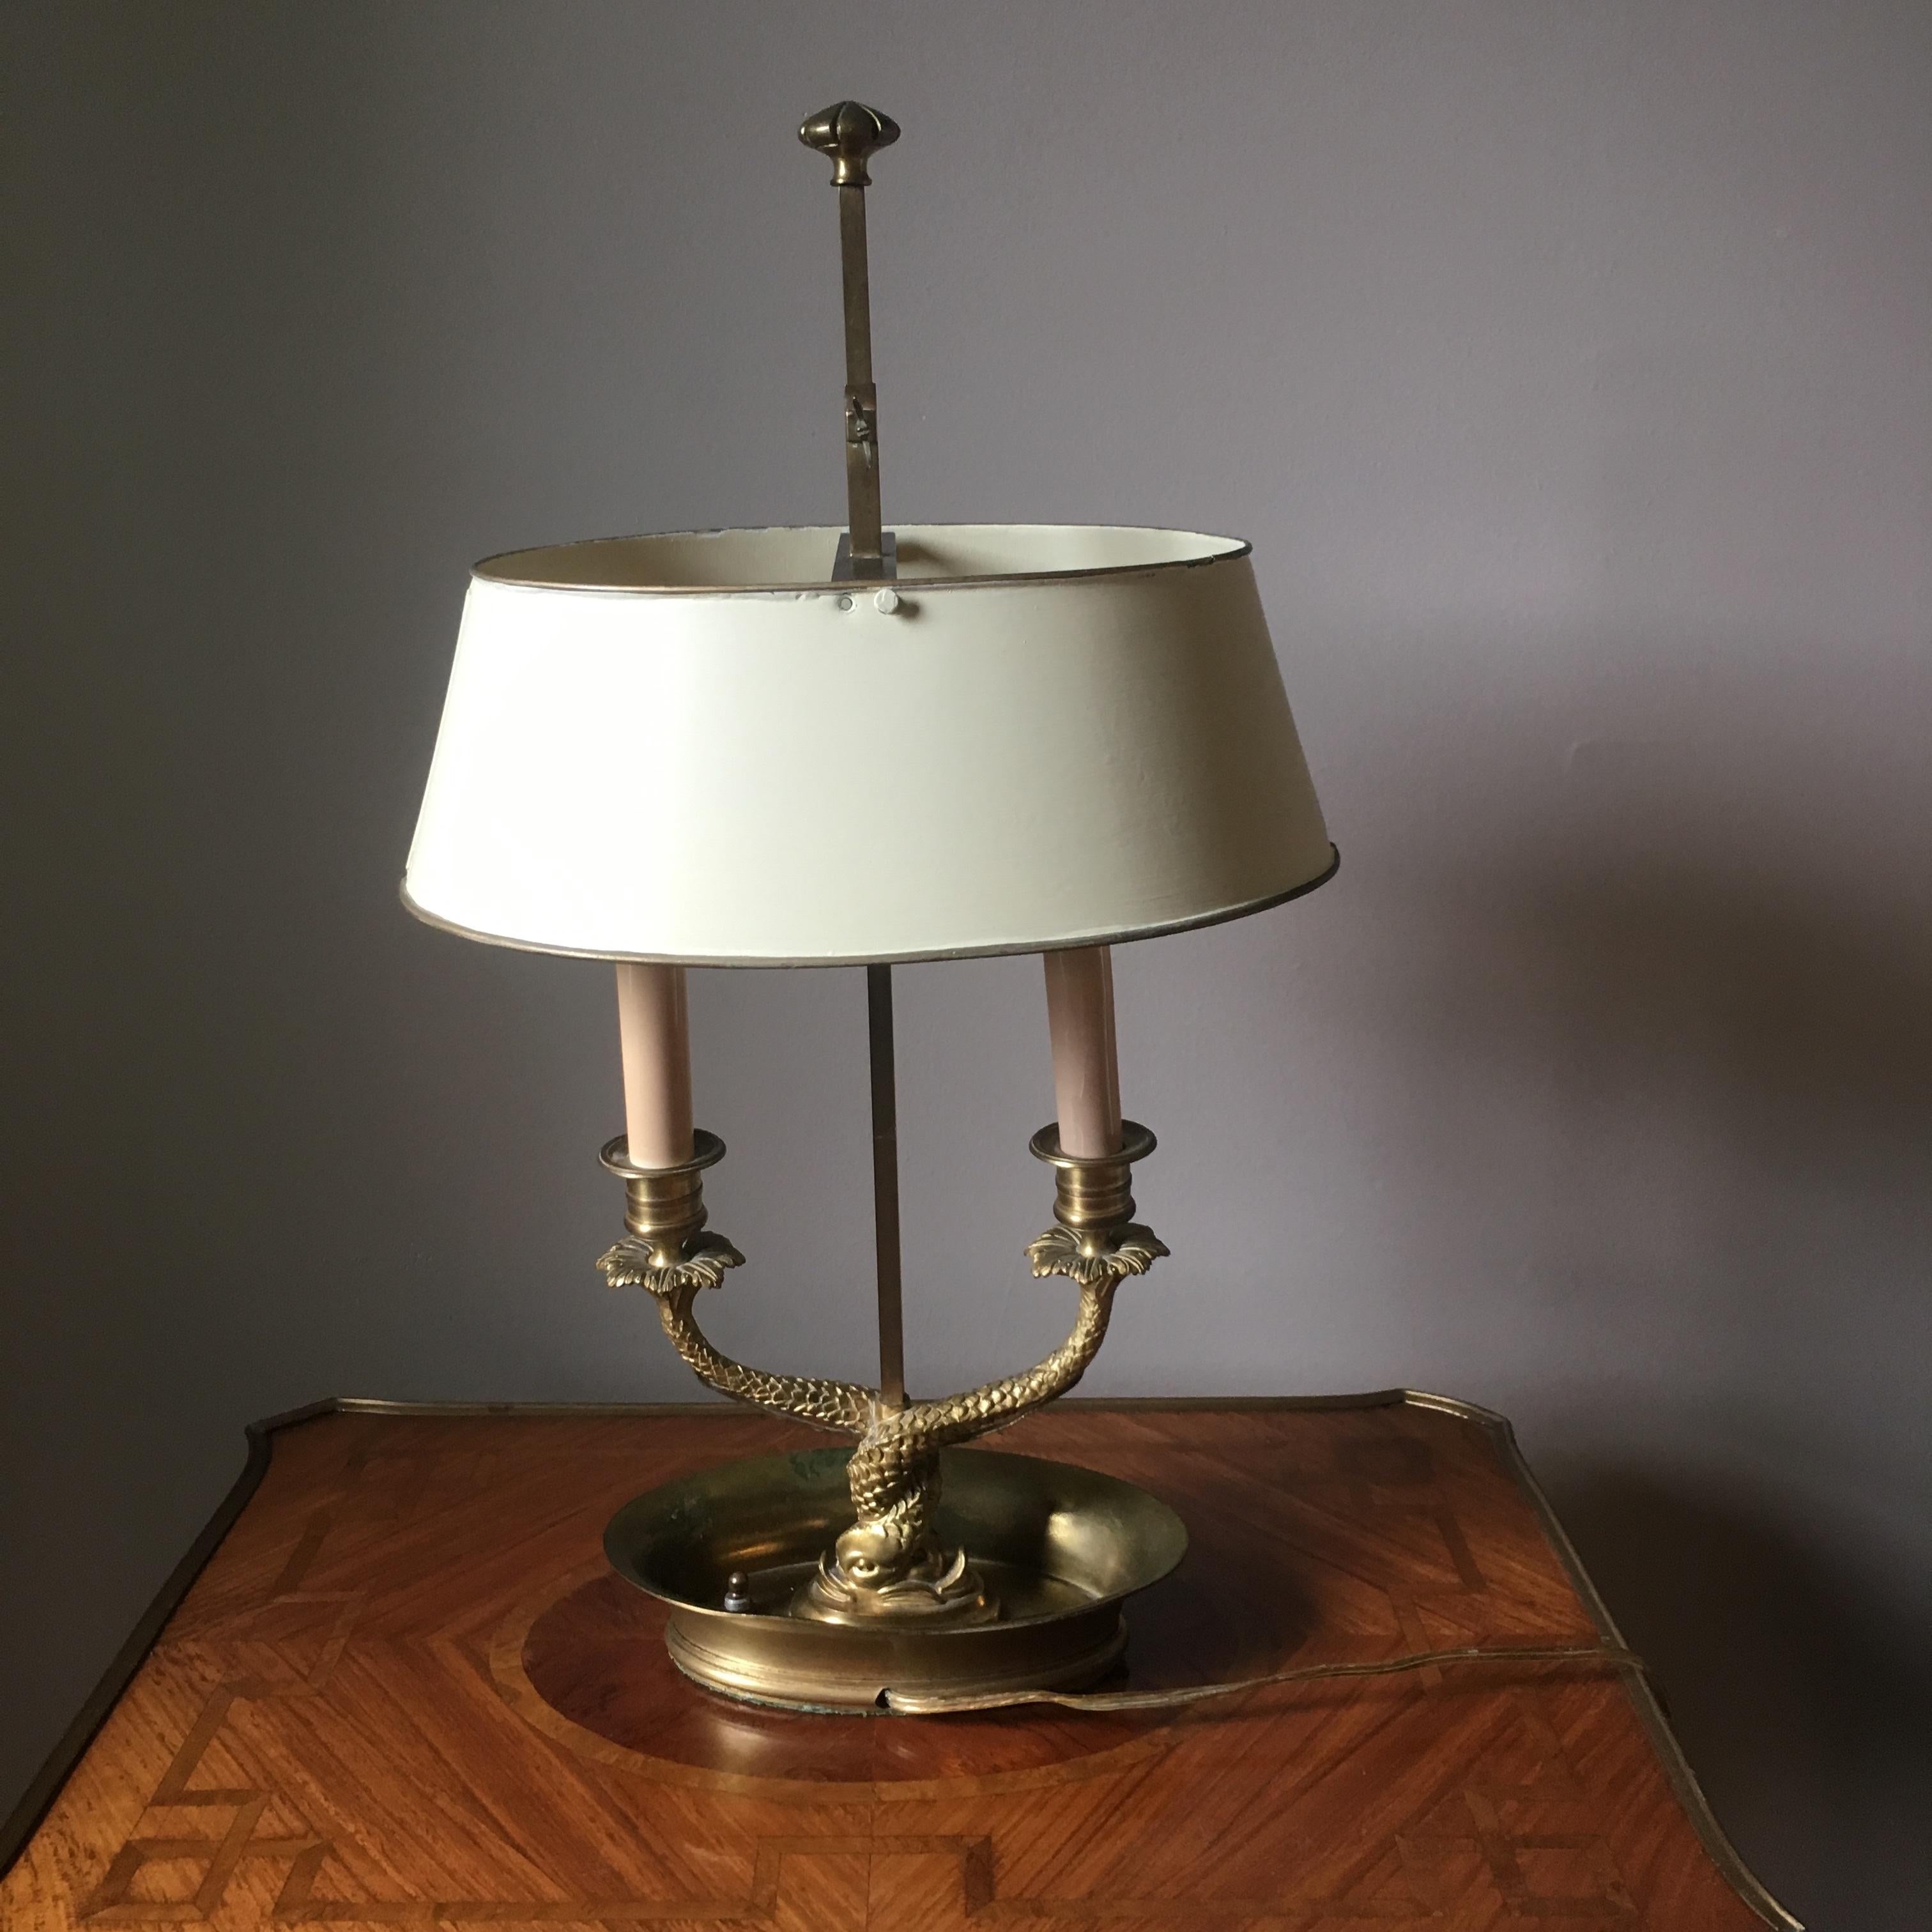 Antique Neoclassical Double Dolphin Brass Bouillotte Lamp With Tole Shade For Sale 2